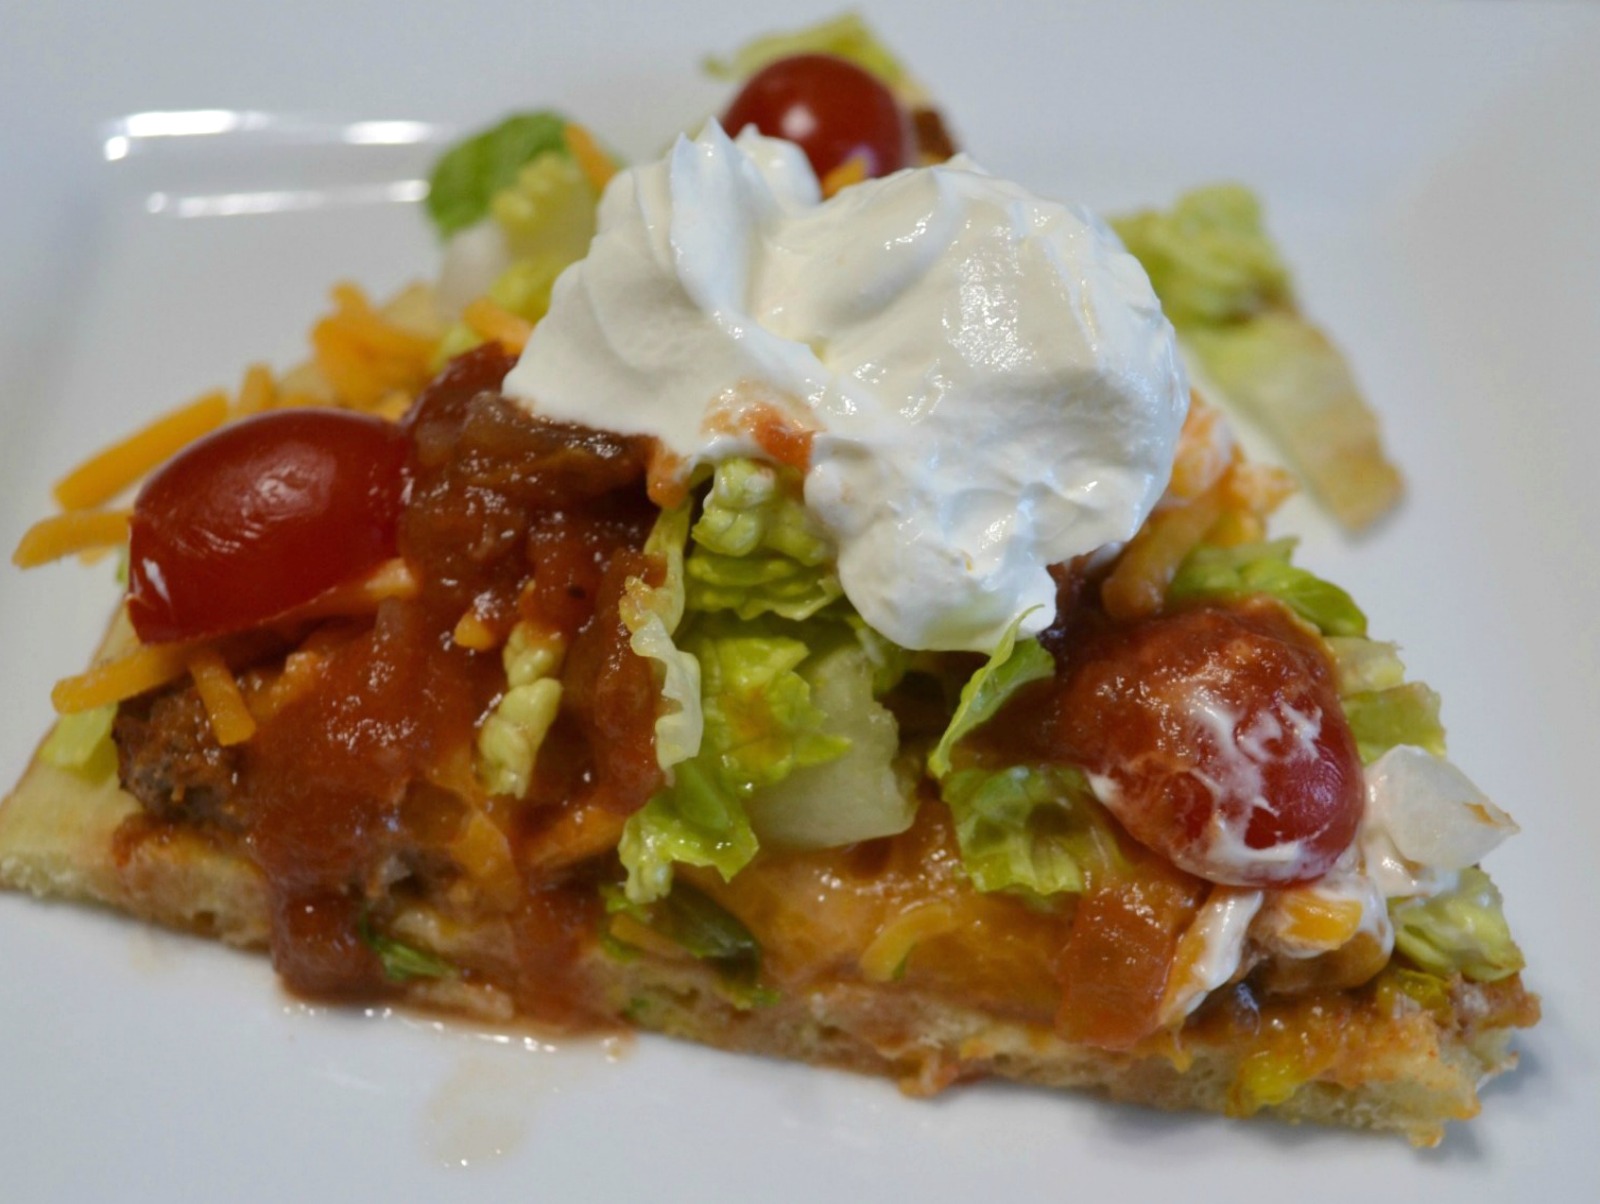 Taco Pizza Supreme is a mexican style pizza loaded with ground beef,sesoings,refried beans and cheese mixture.Taco toppings, sour cream and salsa round it off. 